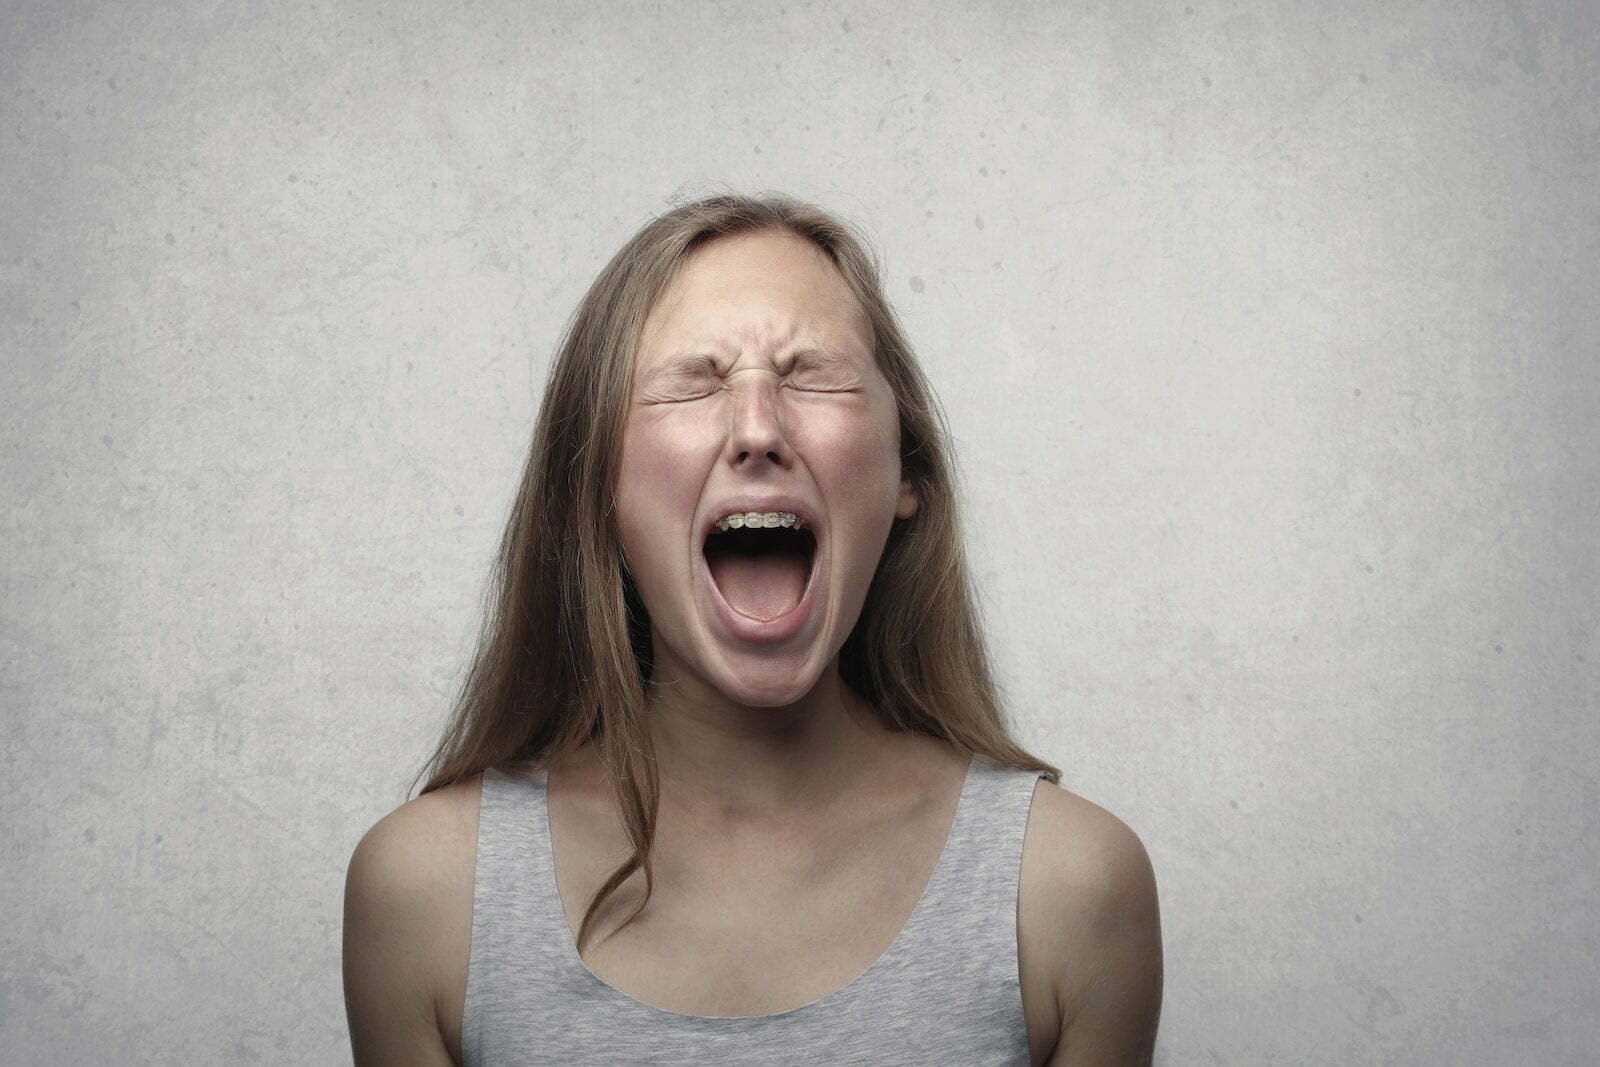 Woman in Gray Tank Top screaming in anger